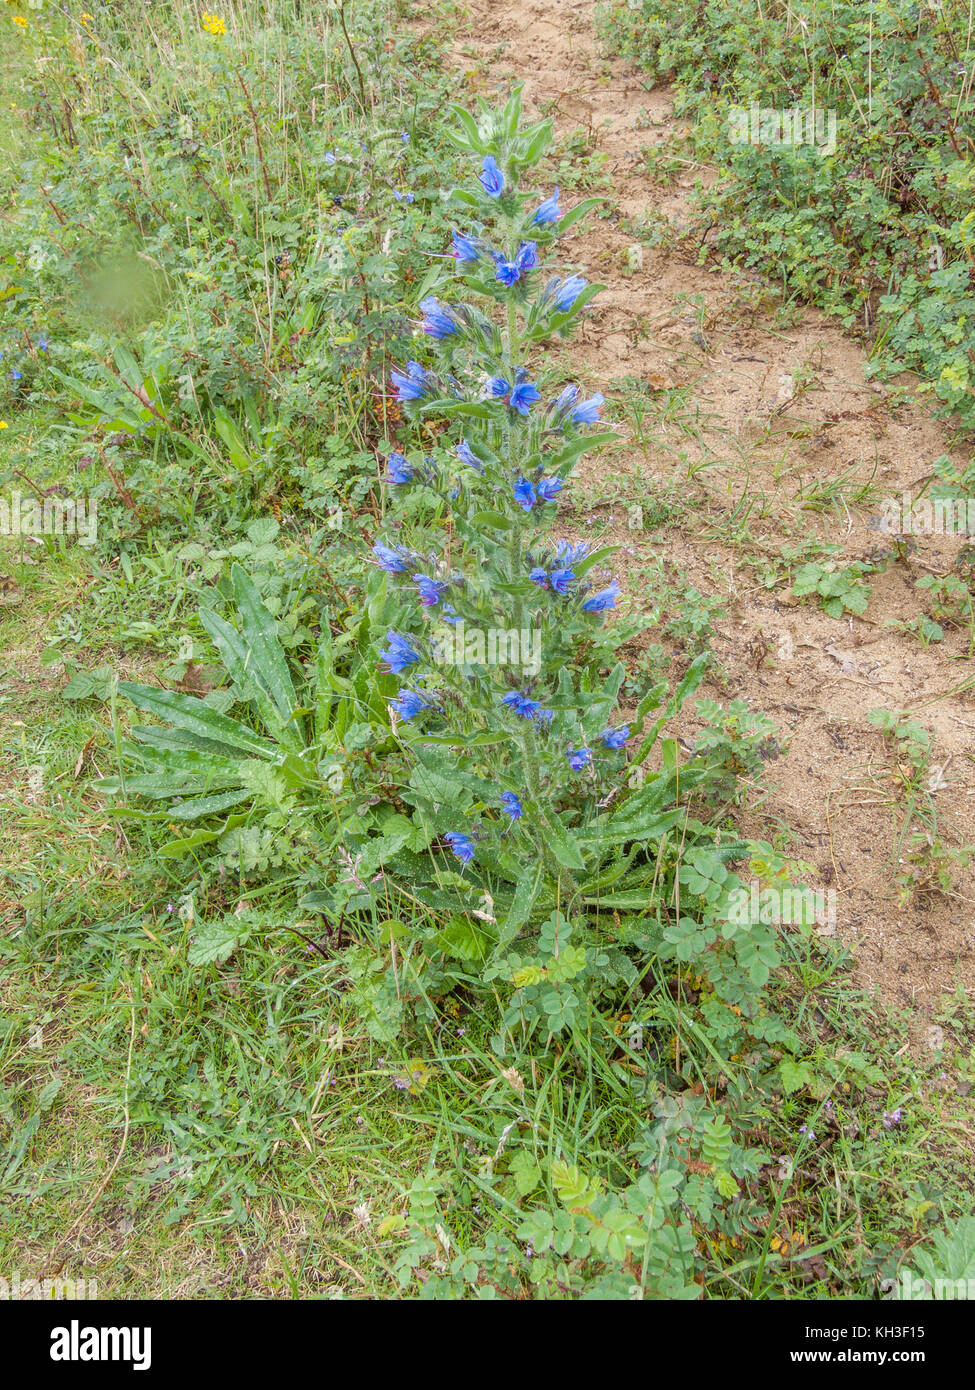 Flowering specimen of Viper's-bugloss / Echium vulgare growing in sandy soil. Medicinal plant once used in herbal remedies. Stock Photo